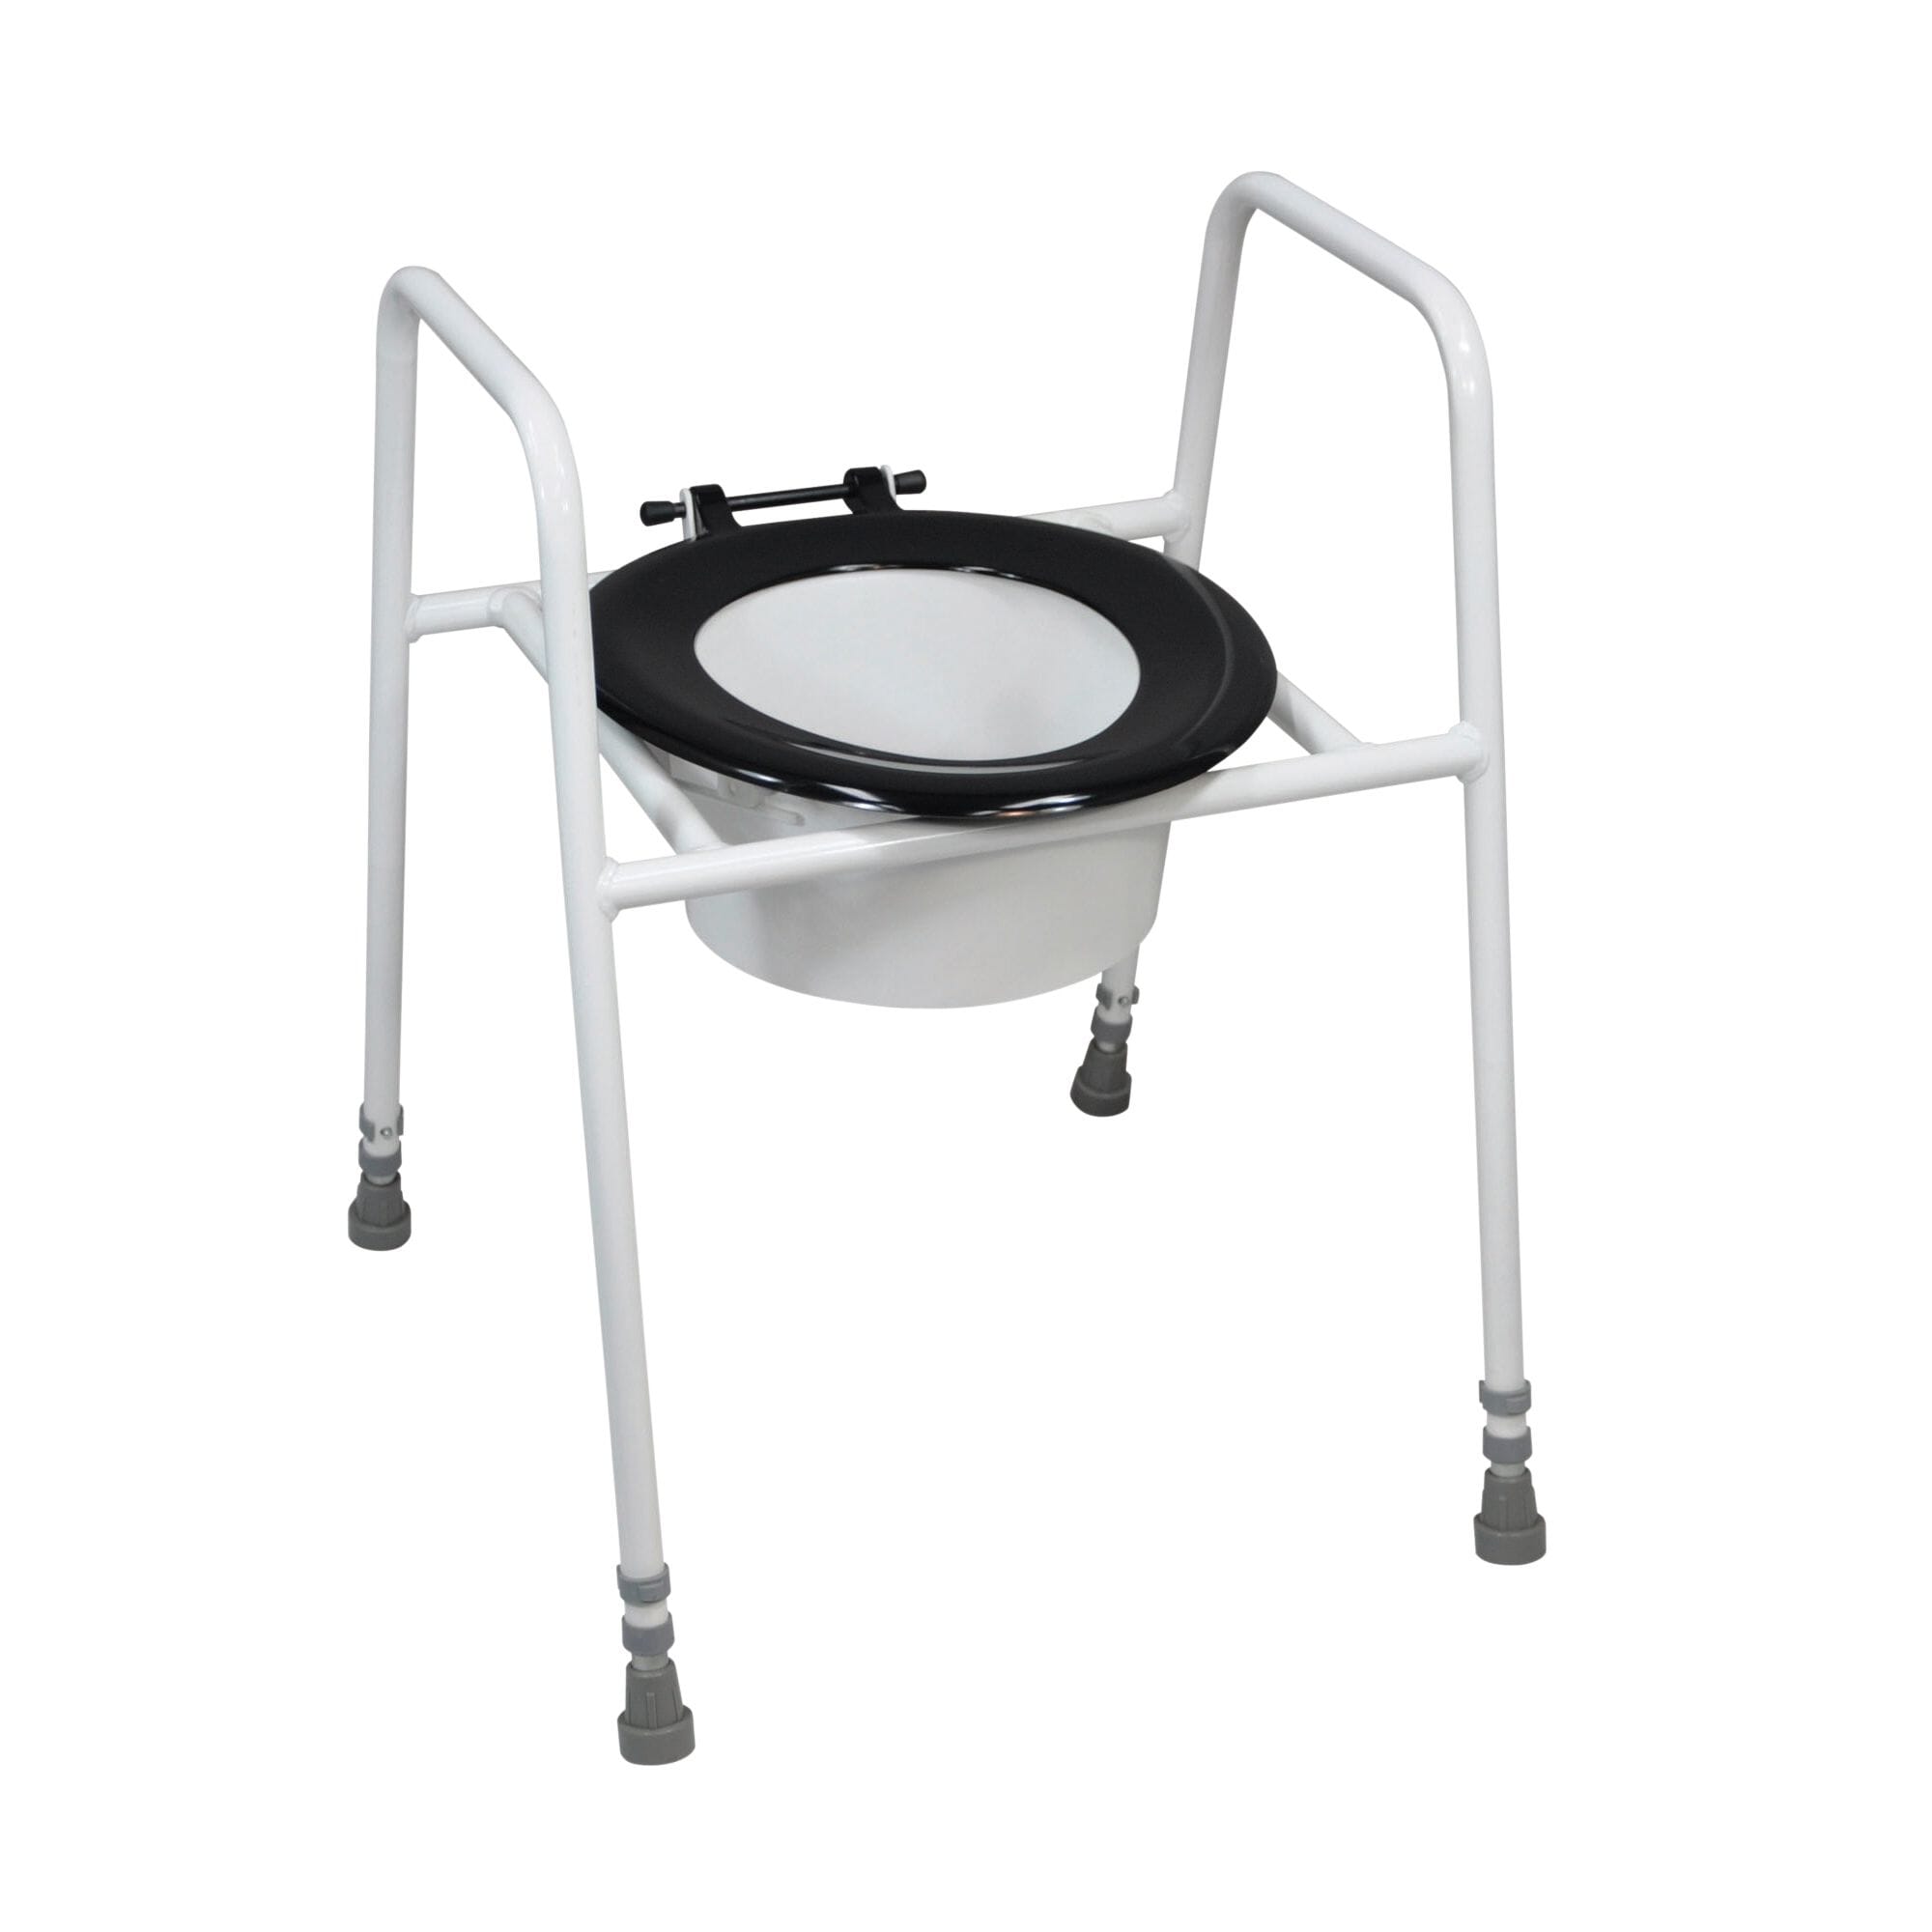 View Solo Skandia Raised Toilet Seat and Frame Free Standing with Splash Guard information